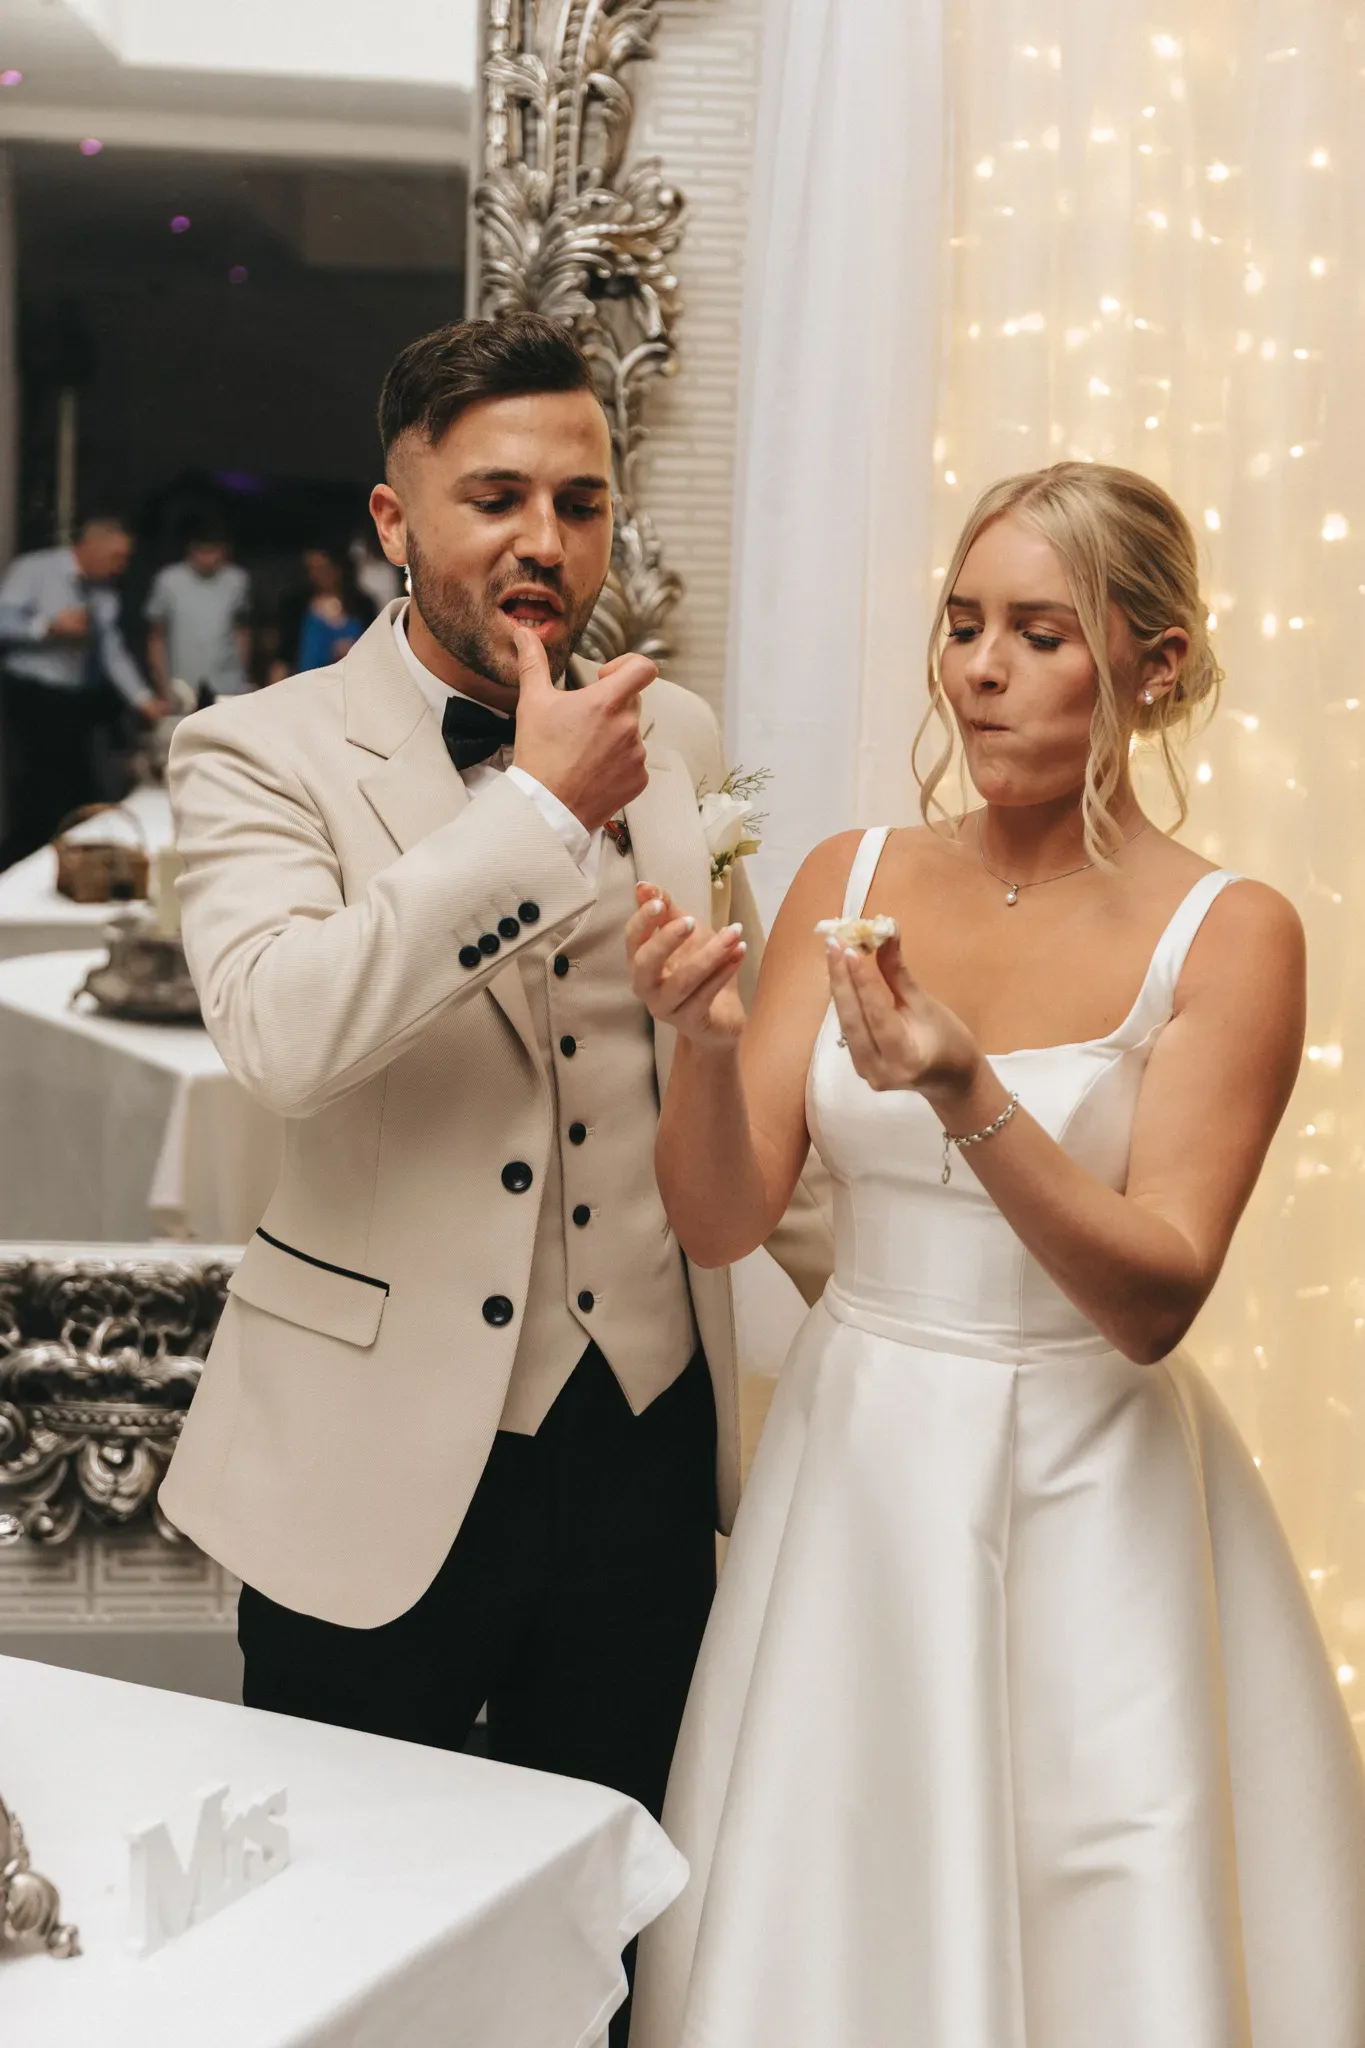 A bride and groom in elegant wedding attire sample food during their reception. the groom, in a cream suit, appears thoughtful, while the bride in a white gown looks unimpressed. a luxurious mirror and fairy lights are in the background.